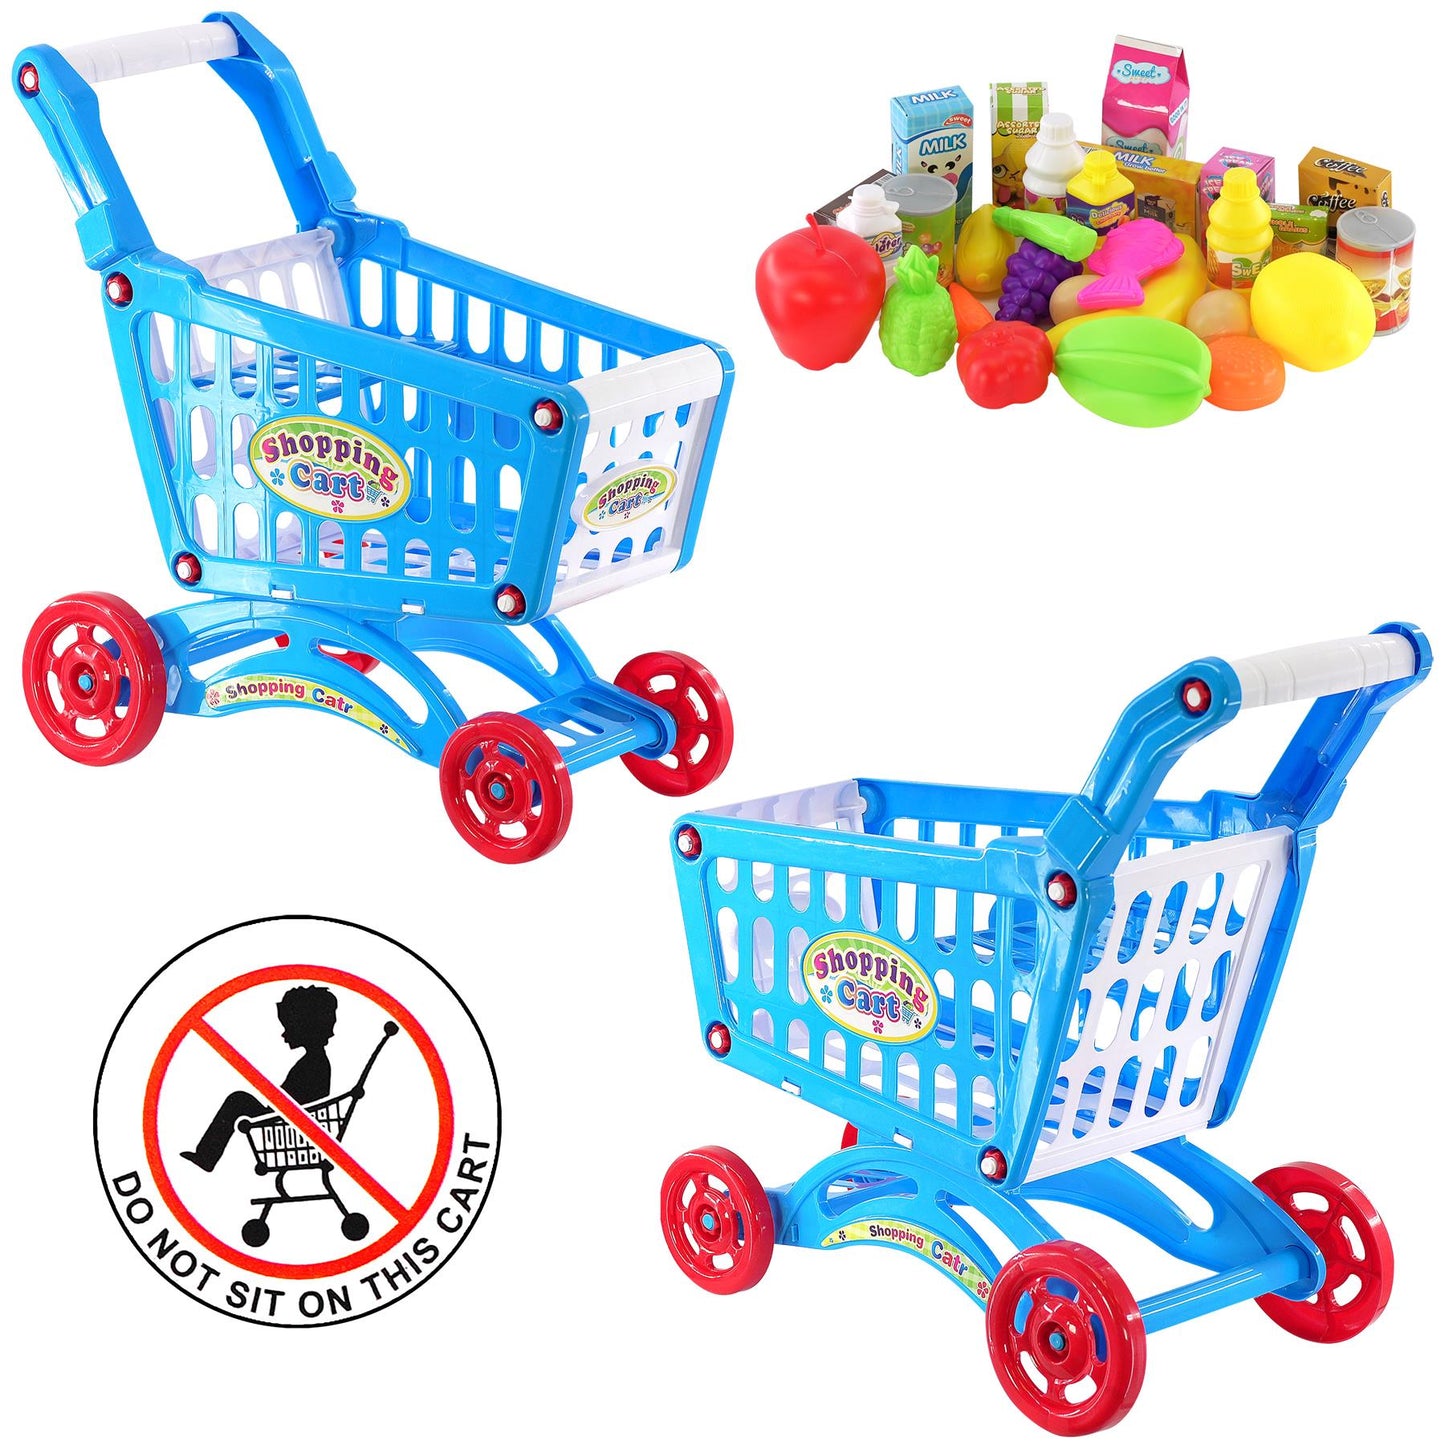 Blue Shopping Trolley Cart Play Food Set by The Magic Toy Shop - UKBuyZone